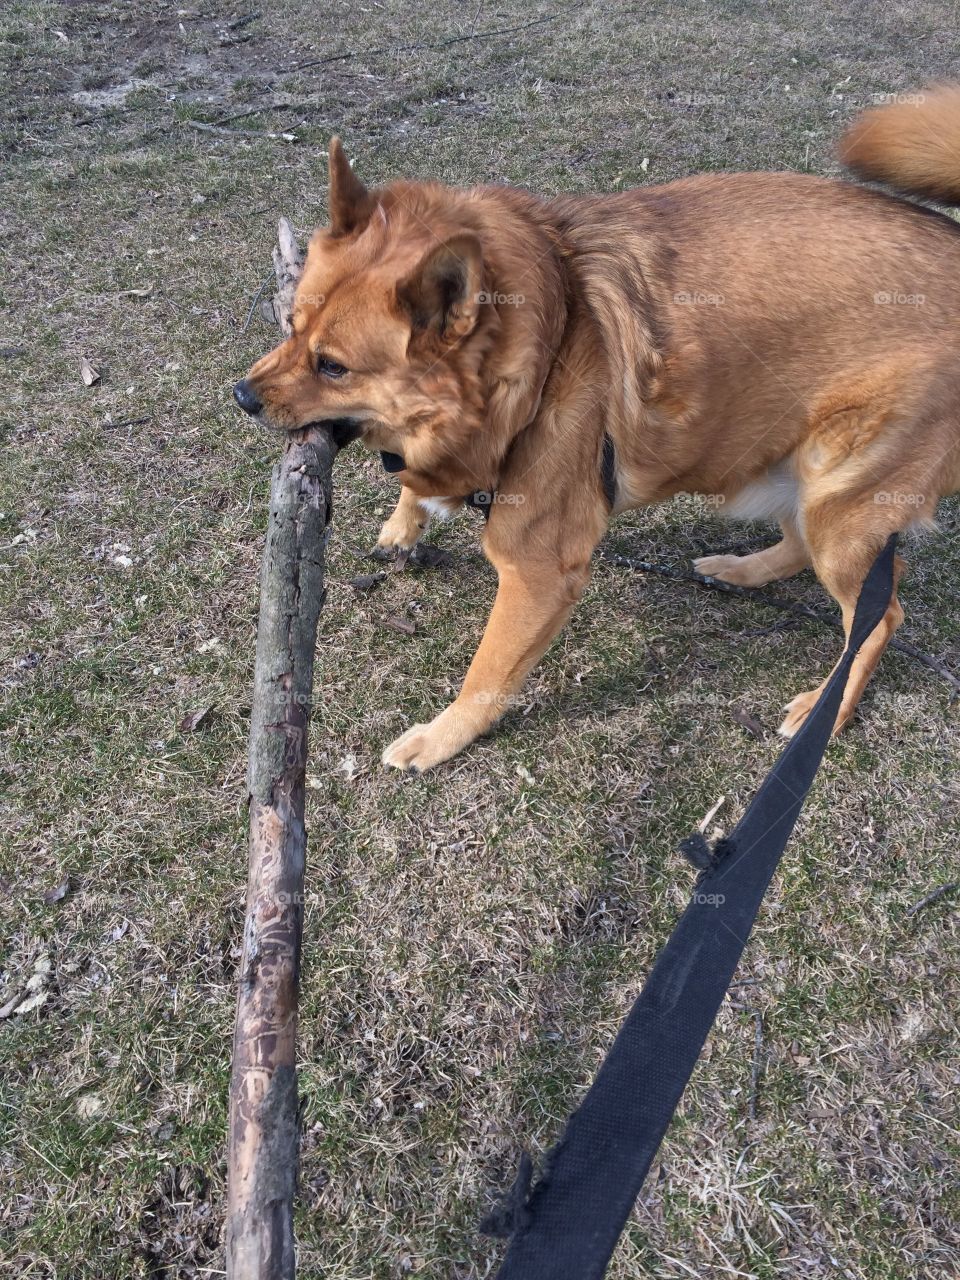 This is my big stick, I am going to take it home now! Of course my dog didn’t get further than 3 feet with it, was too heavy and he didn’t know how to balance it! 